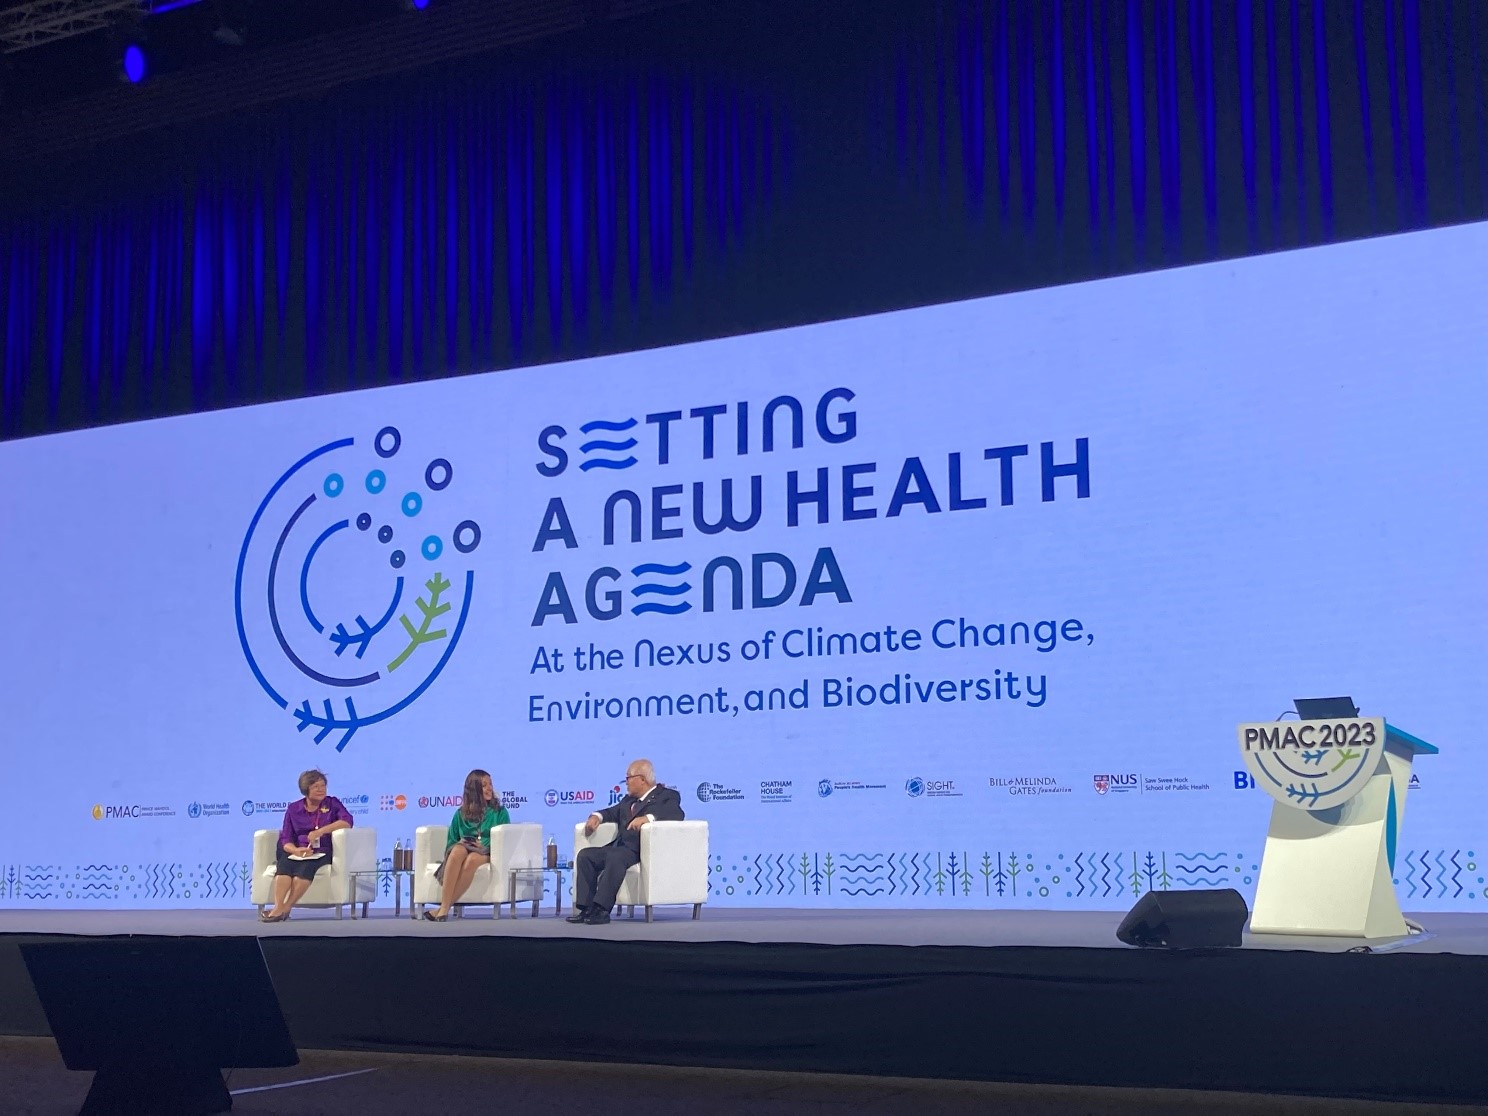 [Event Report] HGPI Manager Attends Prince Mahidol Award Conference (PMAC) 2023 on Climate Change, Biodiversity Loss, and Pollution (January 27, 2023 to January 29, 2023)